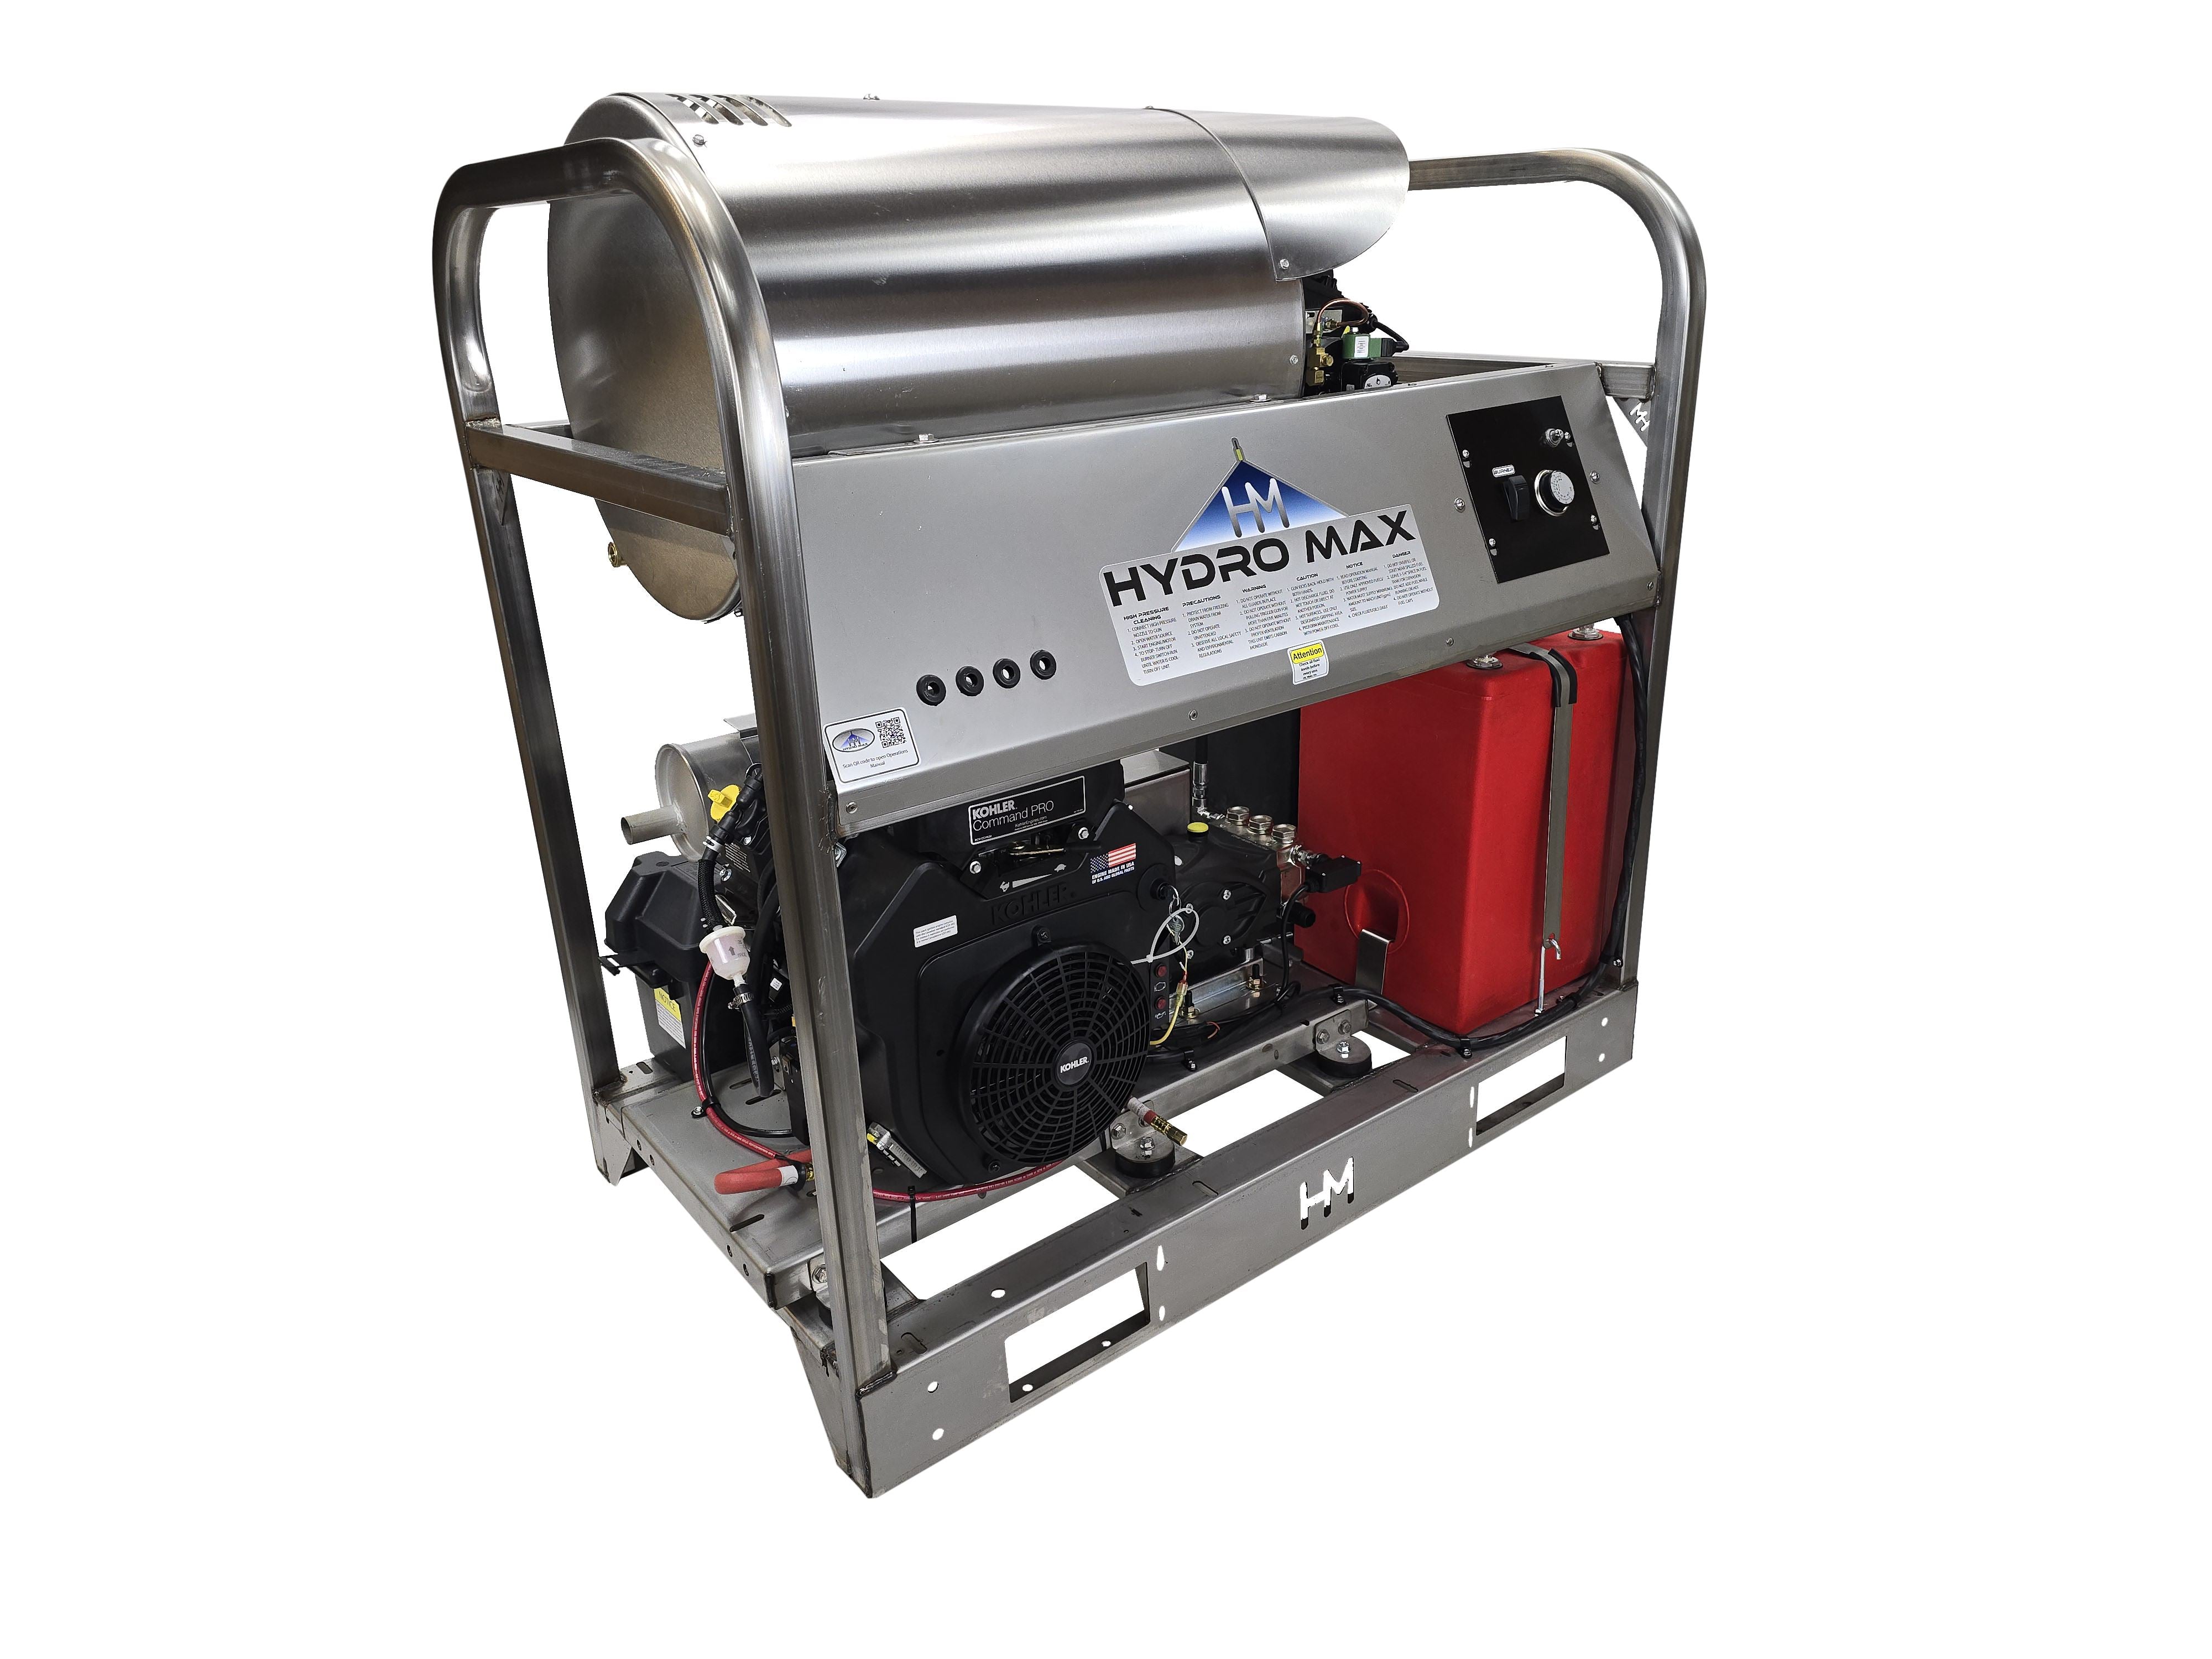 Hydro Max DC8040KGi- 8gpm @ 4000psi, Kohler 26.5HP(Fuel Injected Engine) Hot Water Pressure Washer Hydro Max 